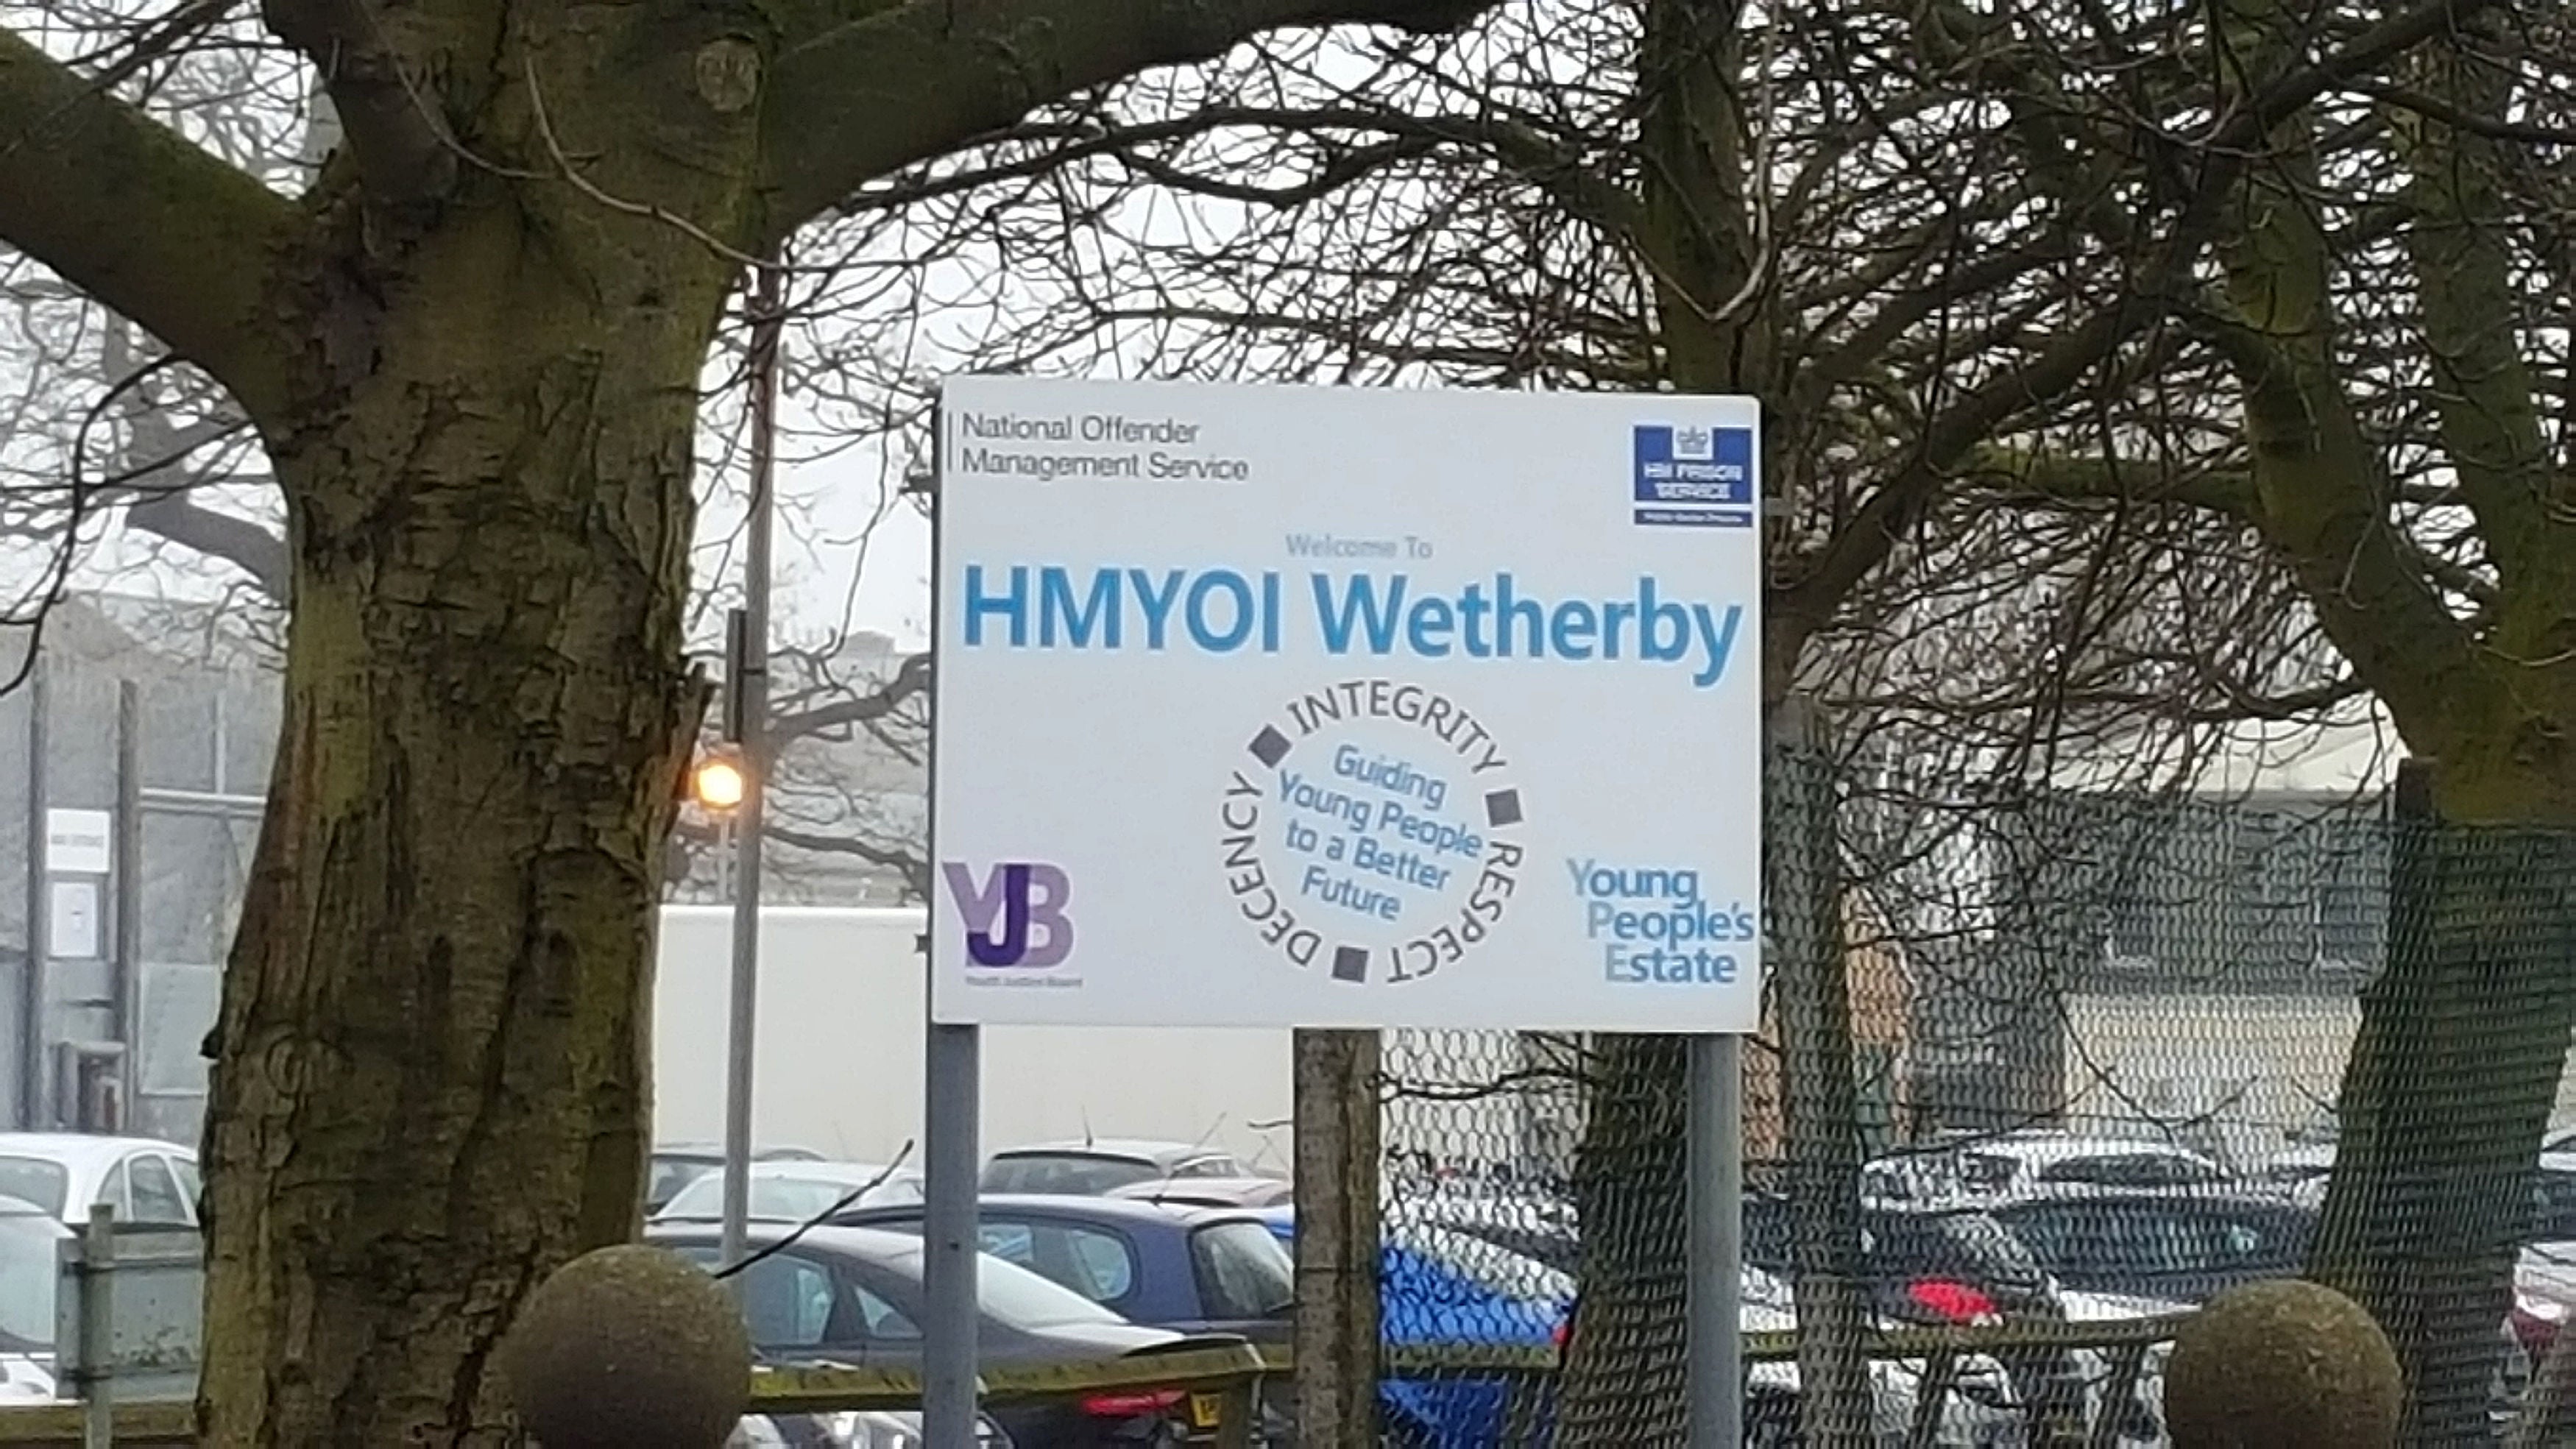 Wetherby Young Offenders Institution, which houses ‘very vulnerable’ young people